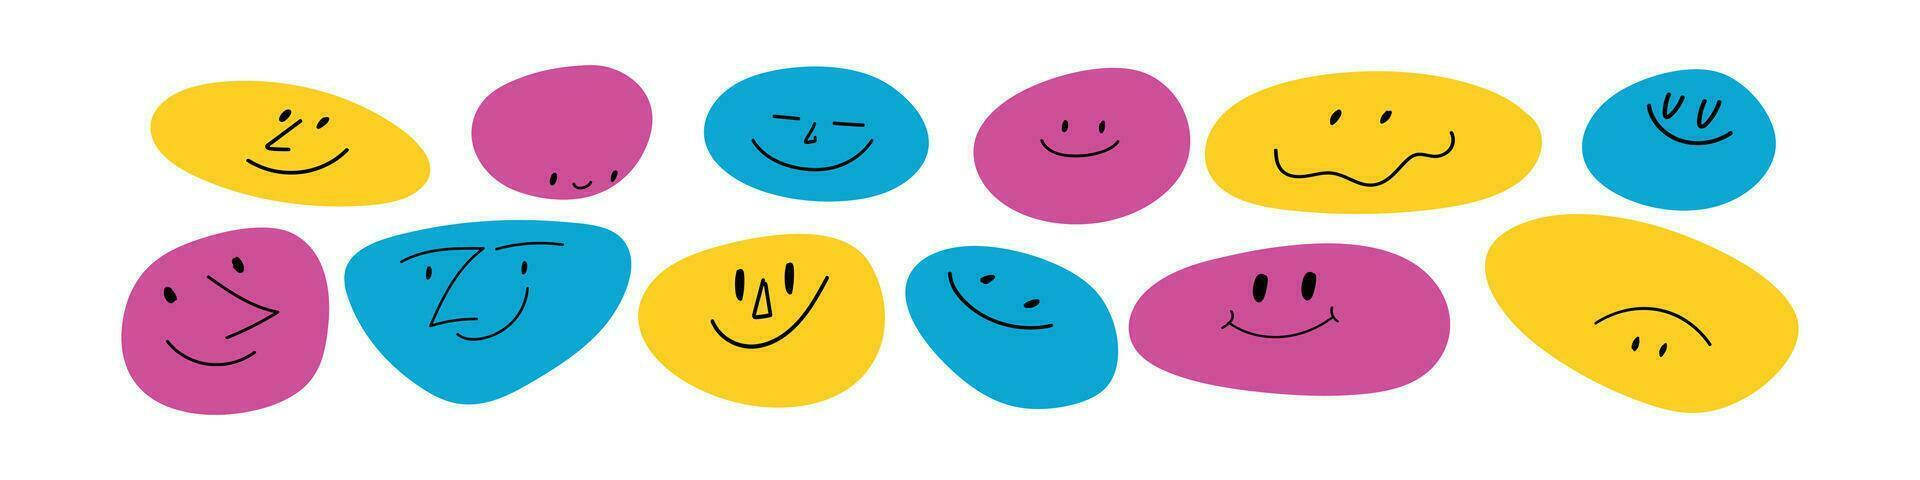 Happy face icon with smile, cheerful emojis and avatars stickers. Abstract cartoon character doodles in cute, retro style. Flat vector illustration isolated on white background.